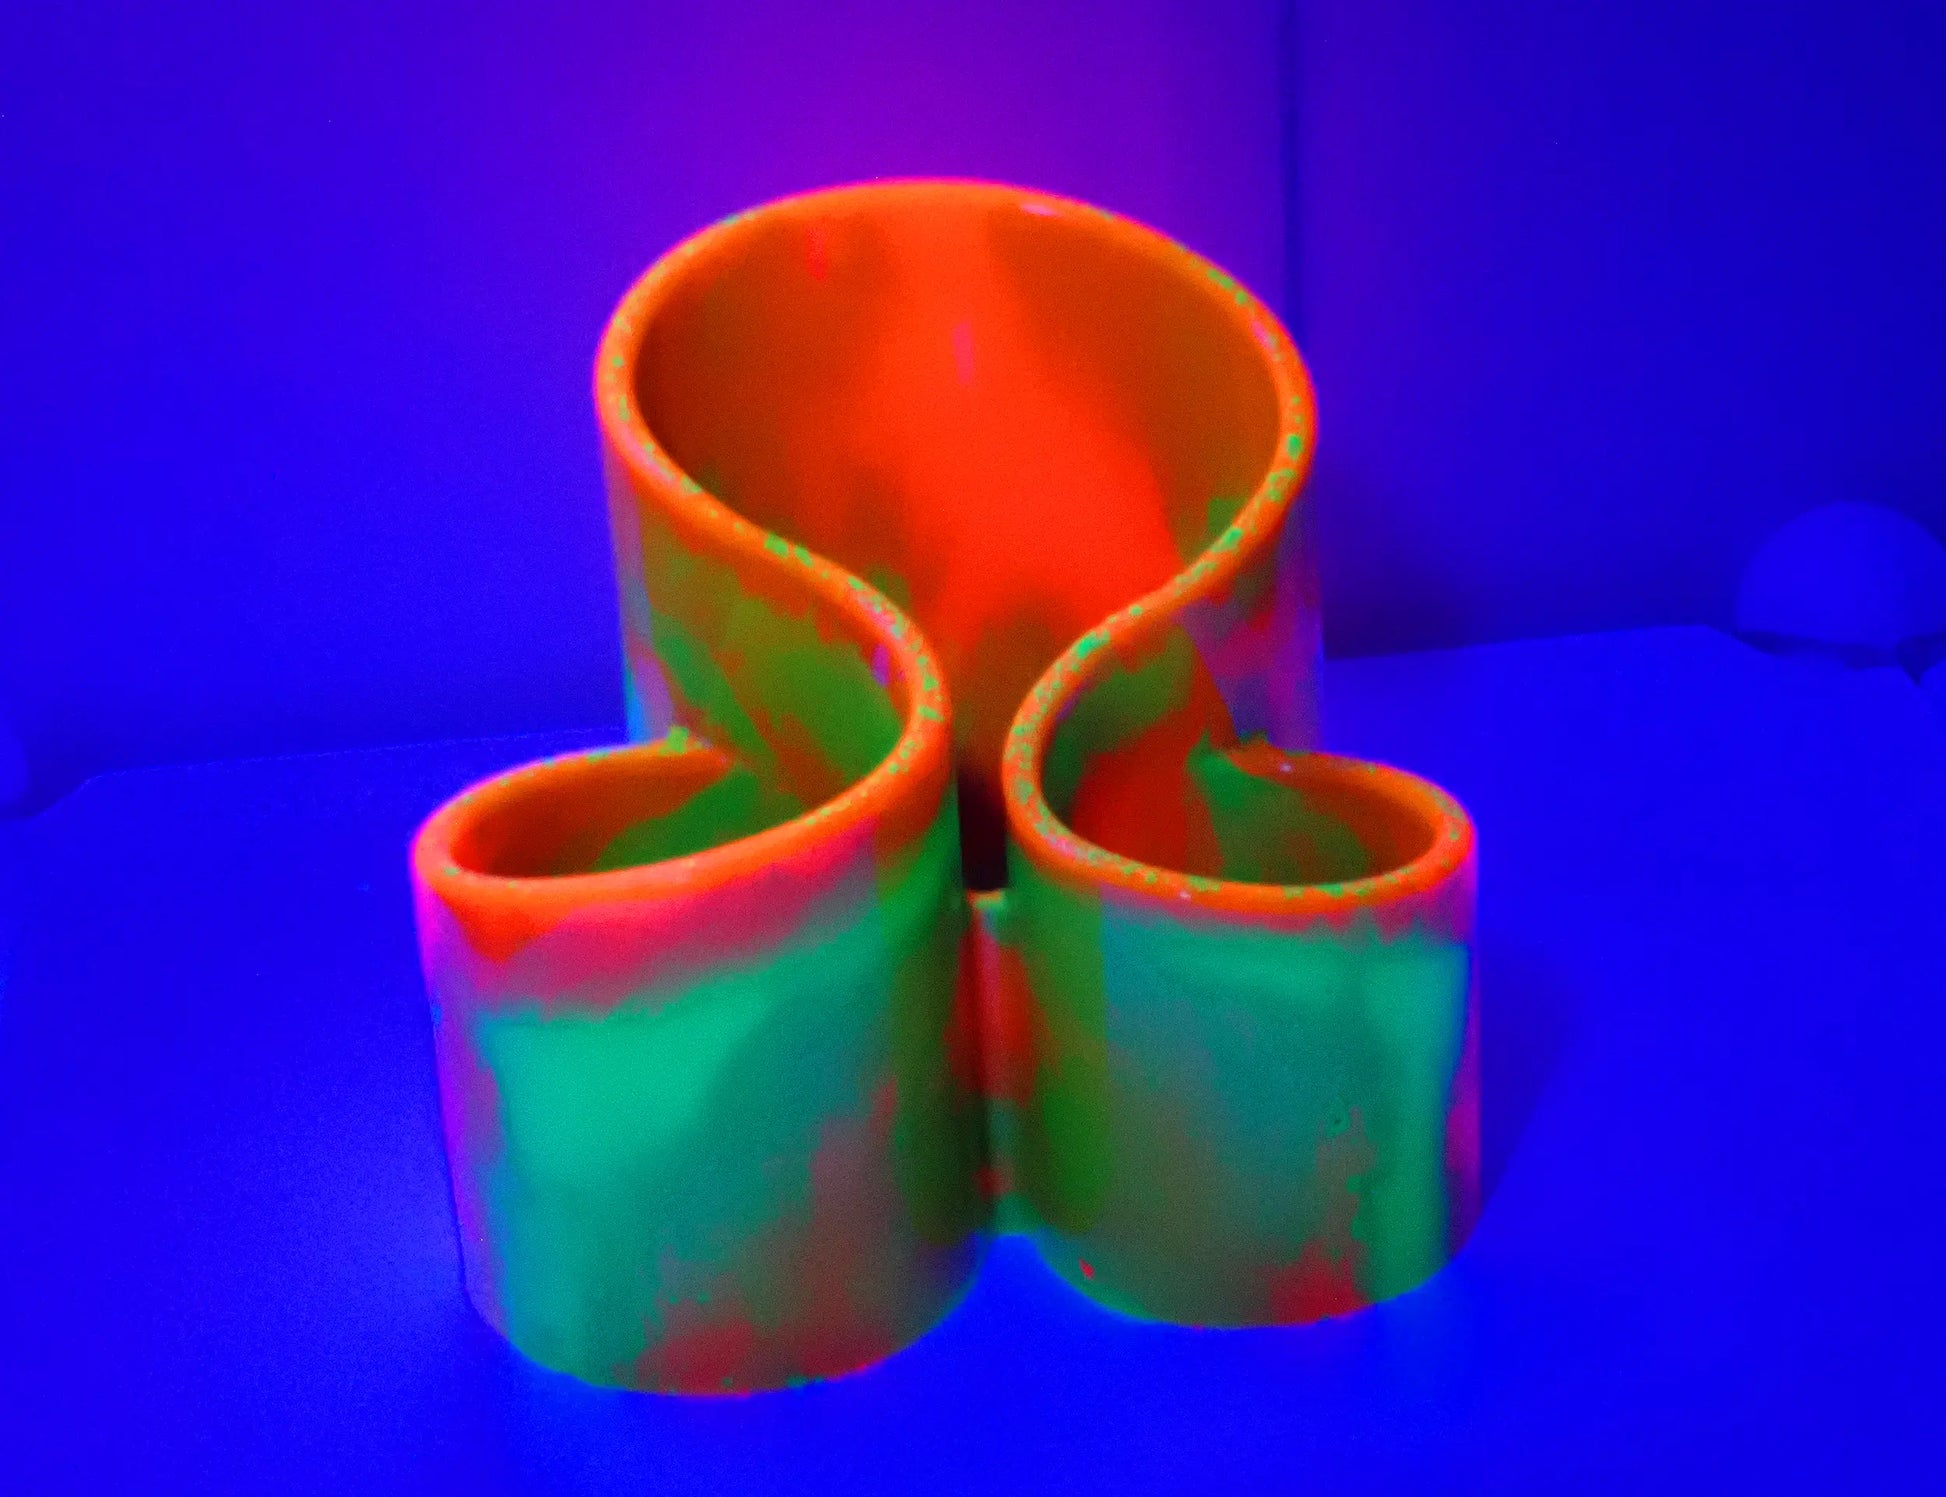 Photo showing how the neon makeup brush holder fluoresces under a UV light. The orange and green colors have a bright glow to them.